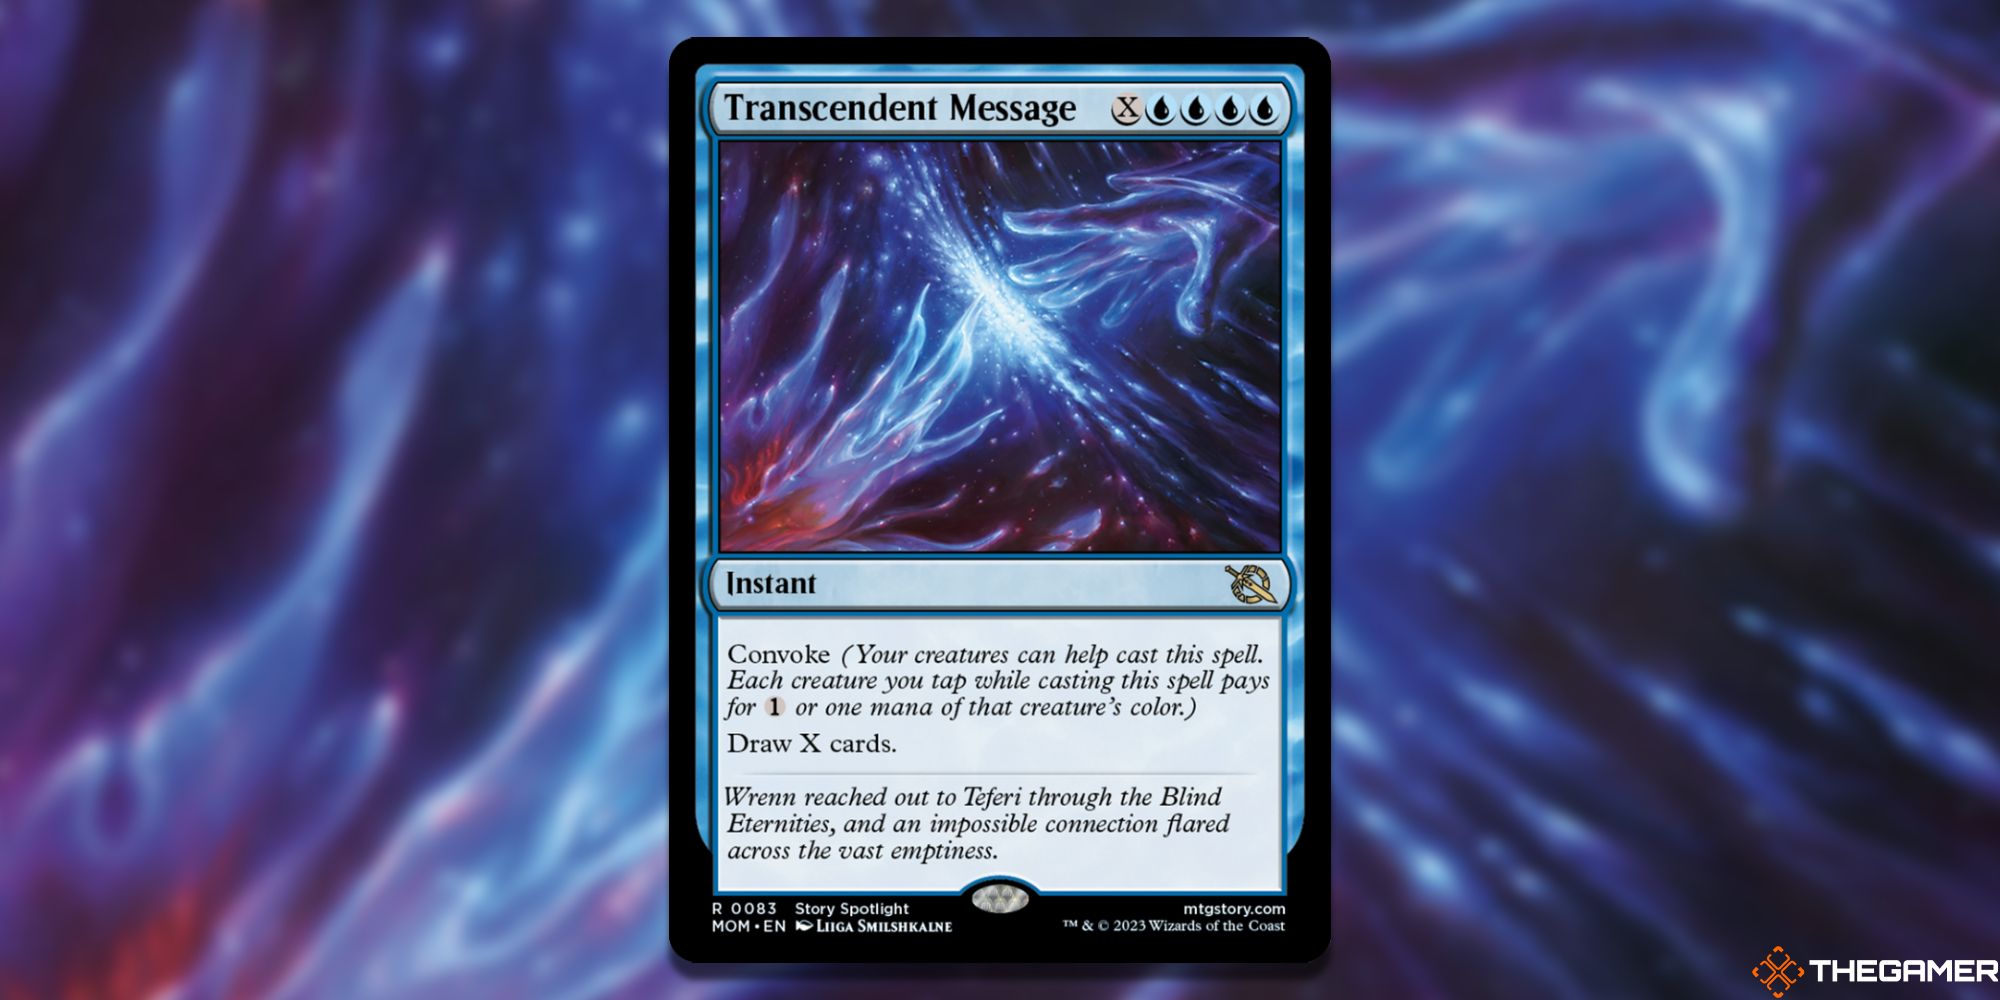 Transcendence message card image from Magic: The Gathering featuring art by Liiga Smilshkalne